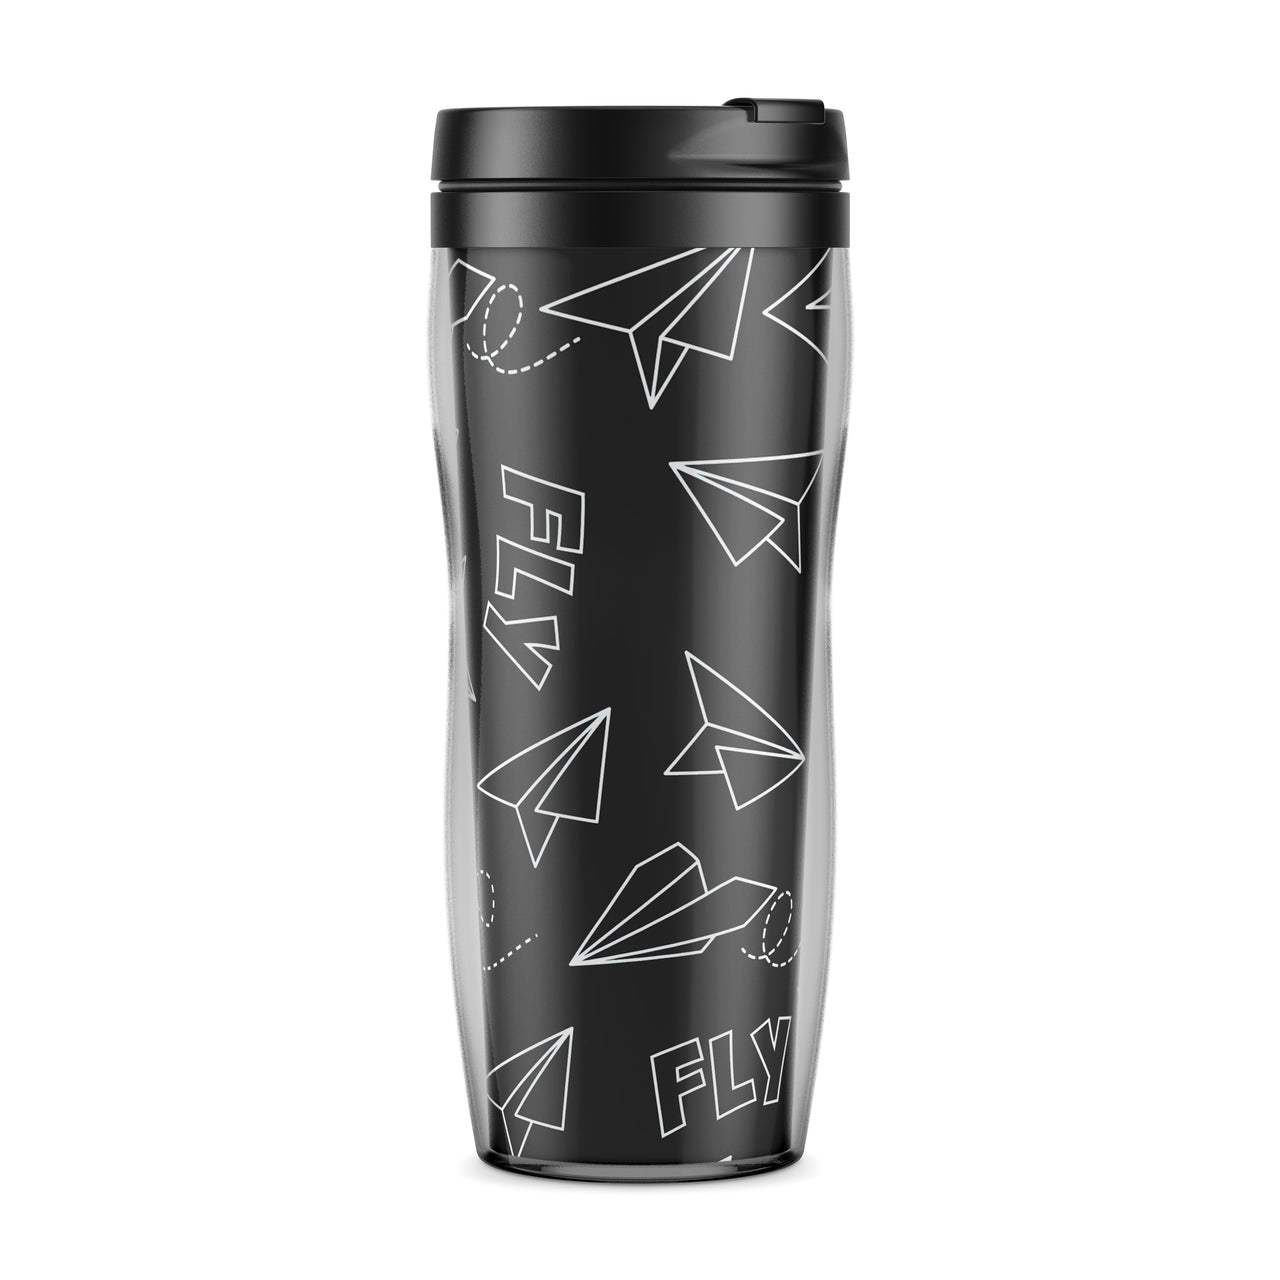 Paper Airplane & Fly-Gray Designed Travel Mugs